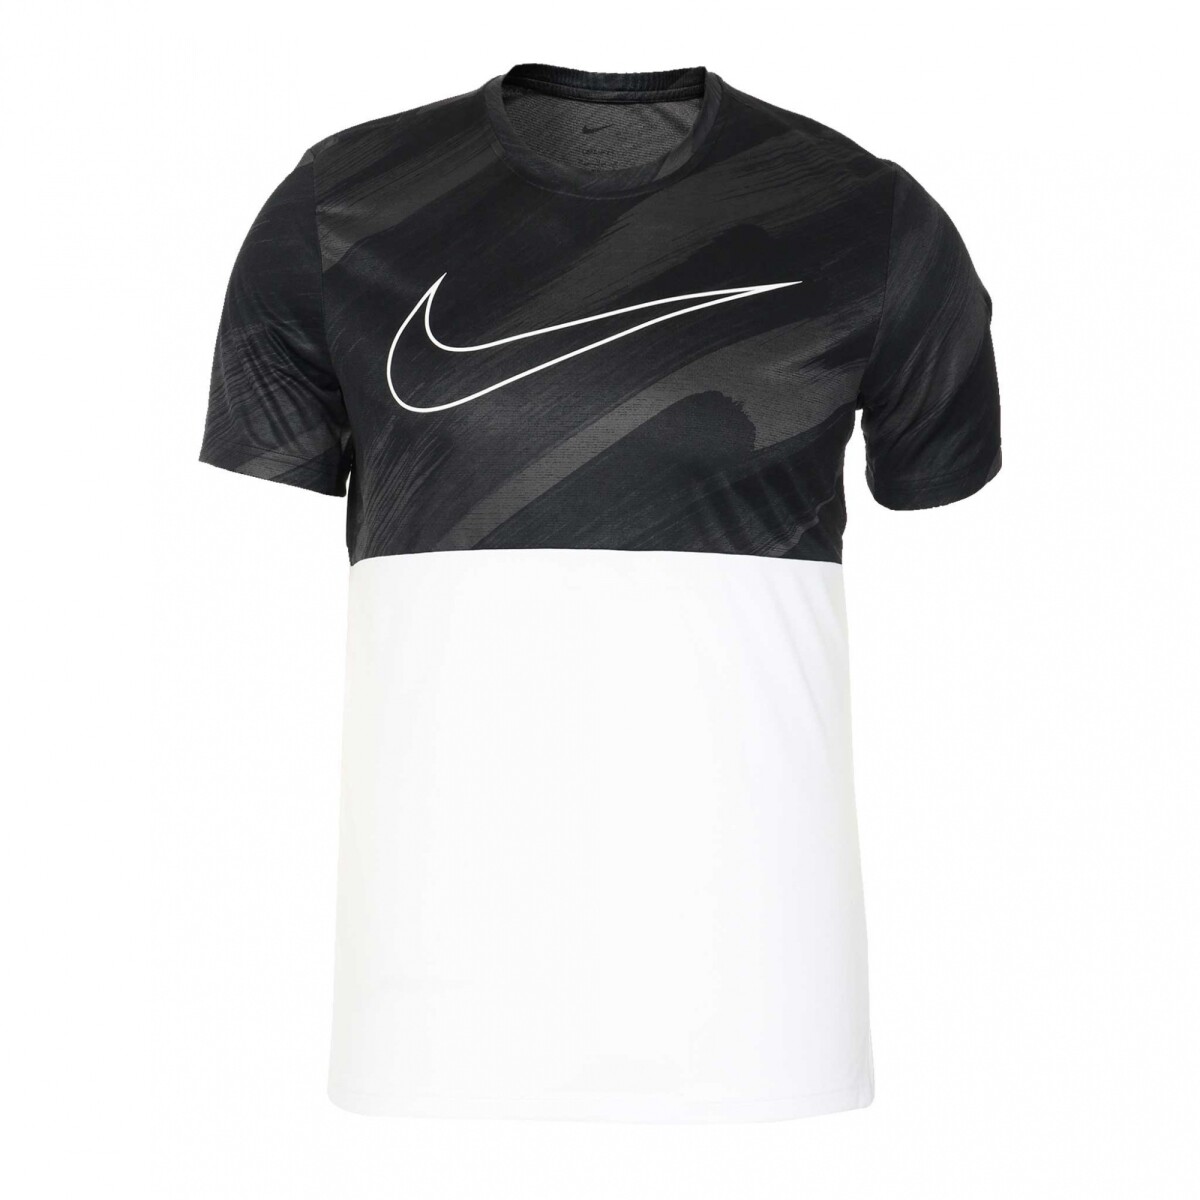 Remera Nike Training Hombre SC Superset SS - S/C 